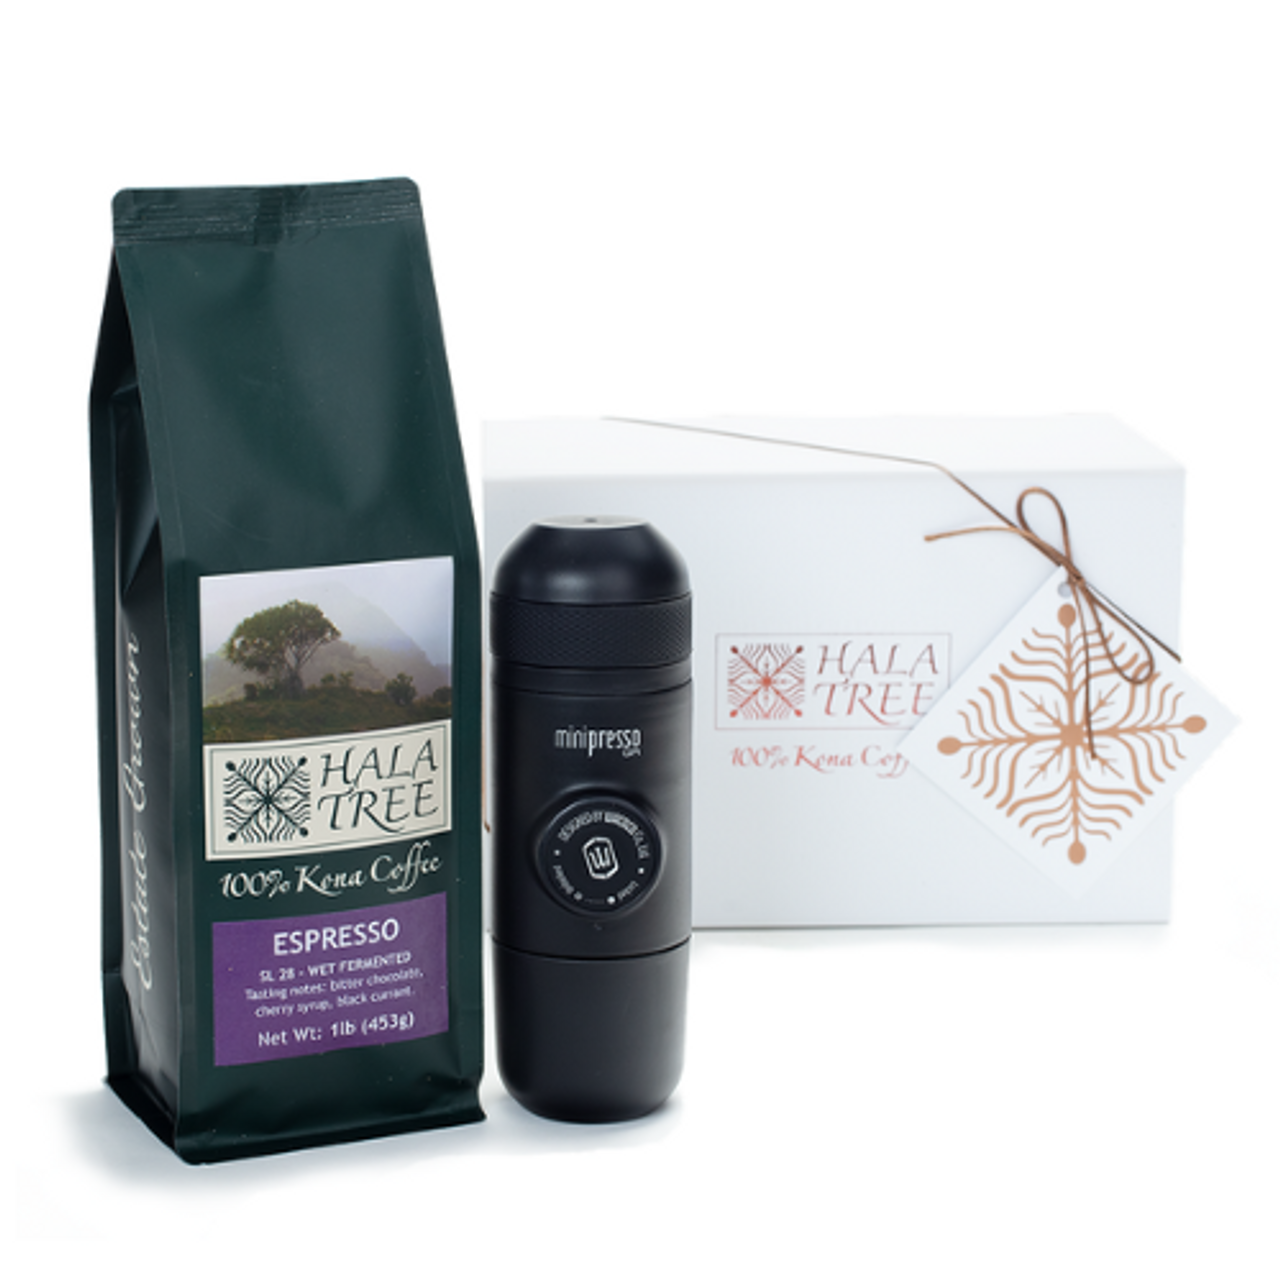 Boost Healthy Espresso Gift Box for Coffee lovers, An Italian Espresso Machine Set for Women and Men, Birthday, Holidays, or Special Occasions Gifts